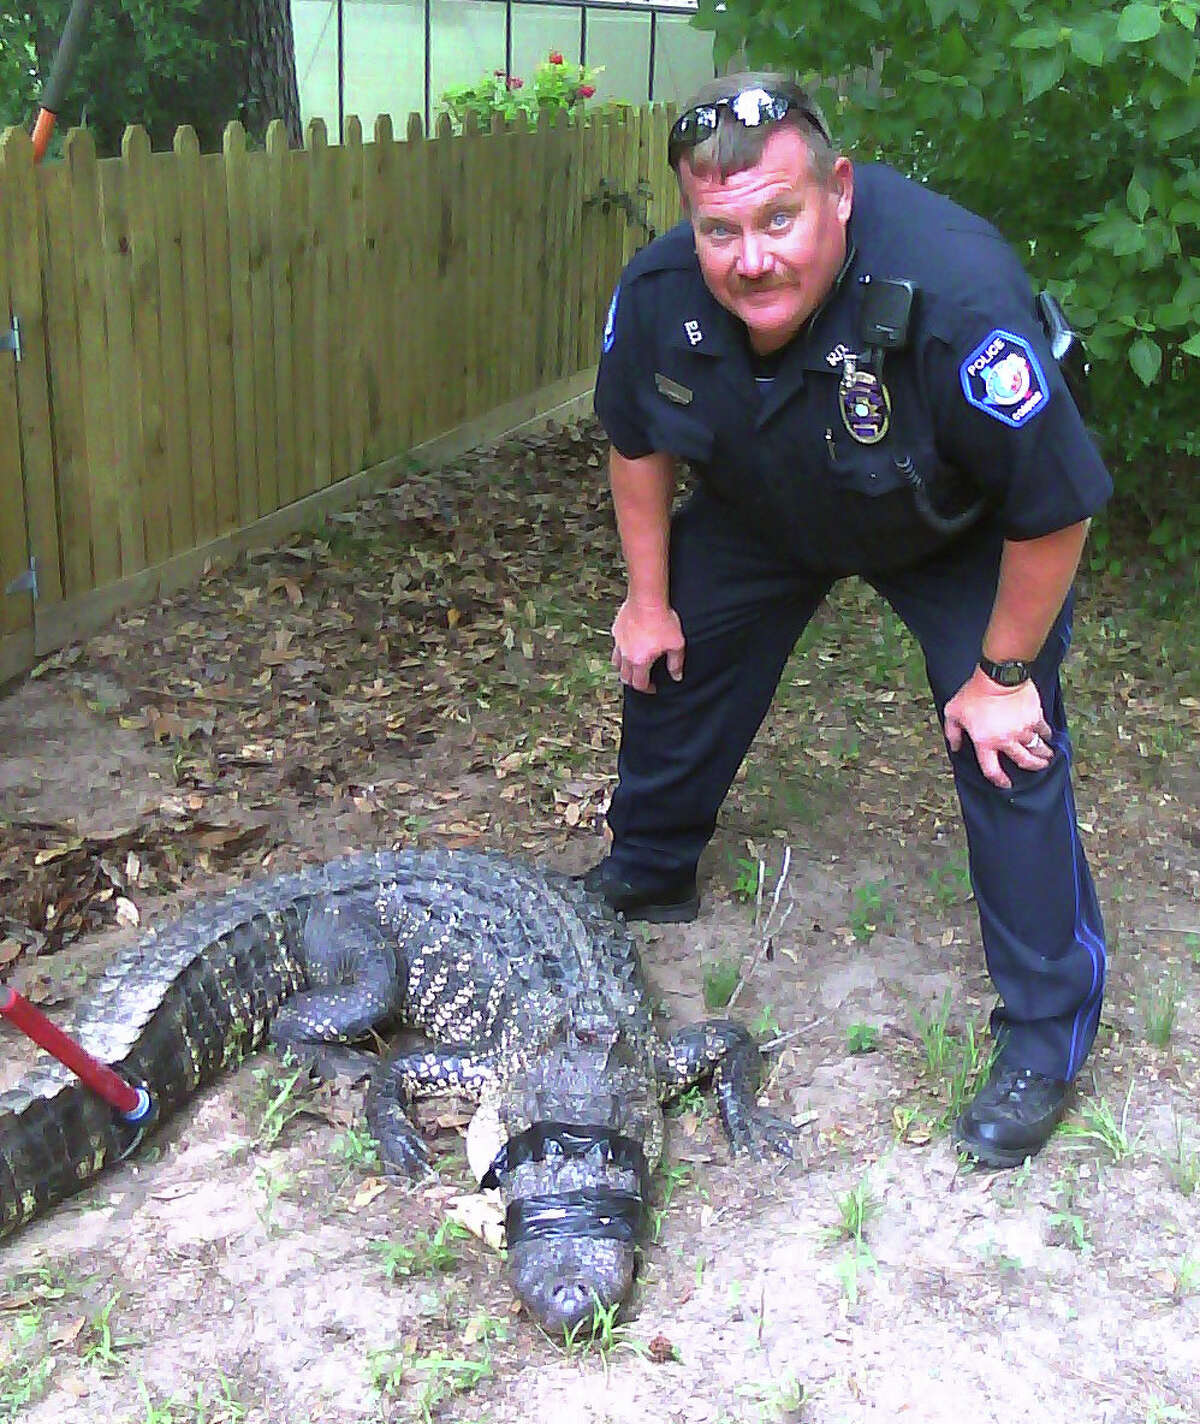 Conroe police on Tuesday removed this 7-foot, 7-inch alligator from a back yard in the Silverstone subdivision. The officer shown is Officer Joe Oldner.